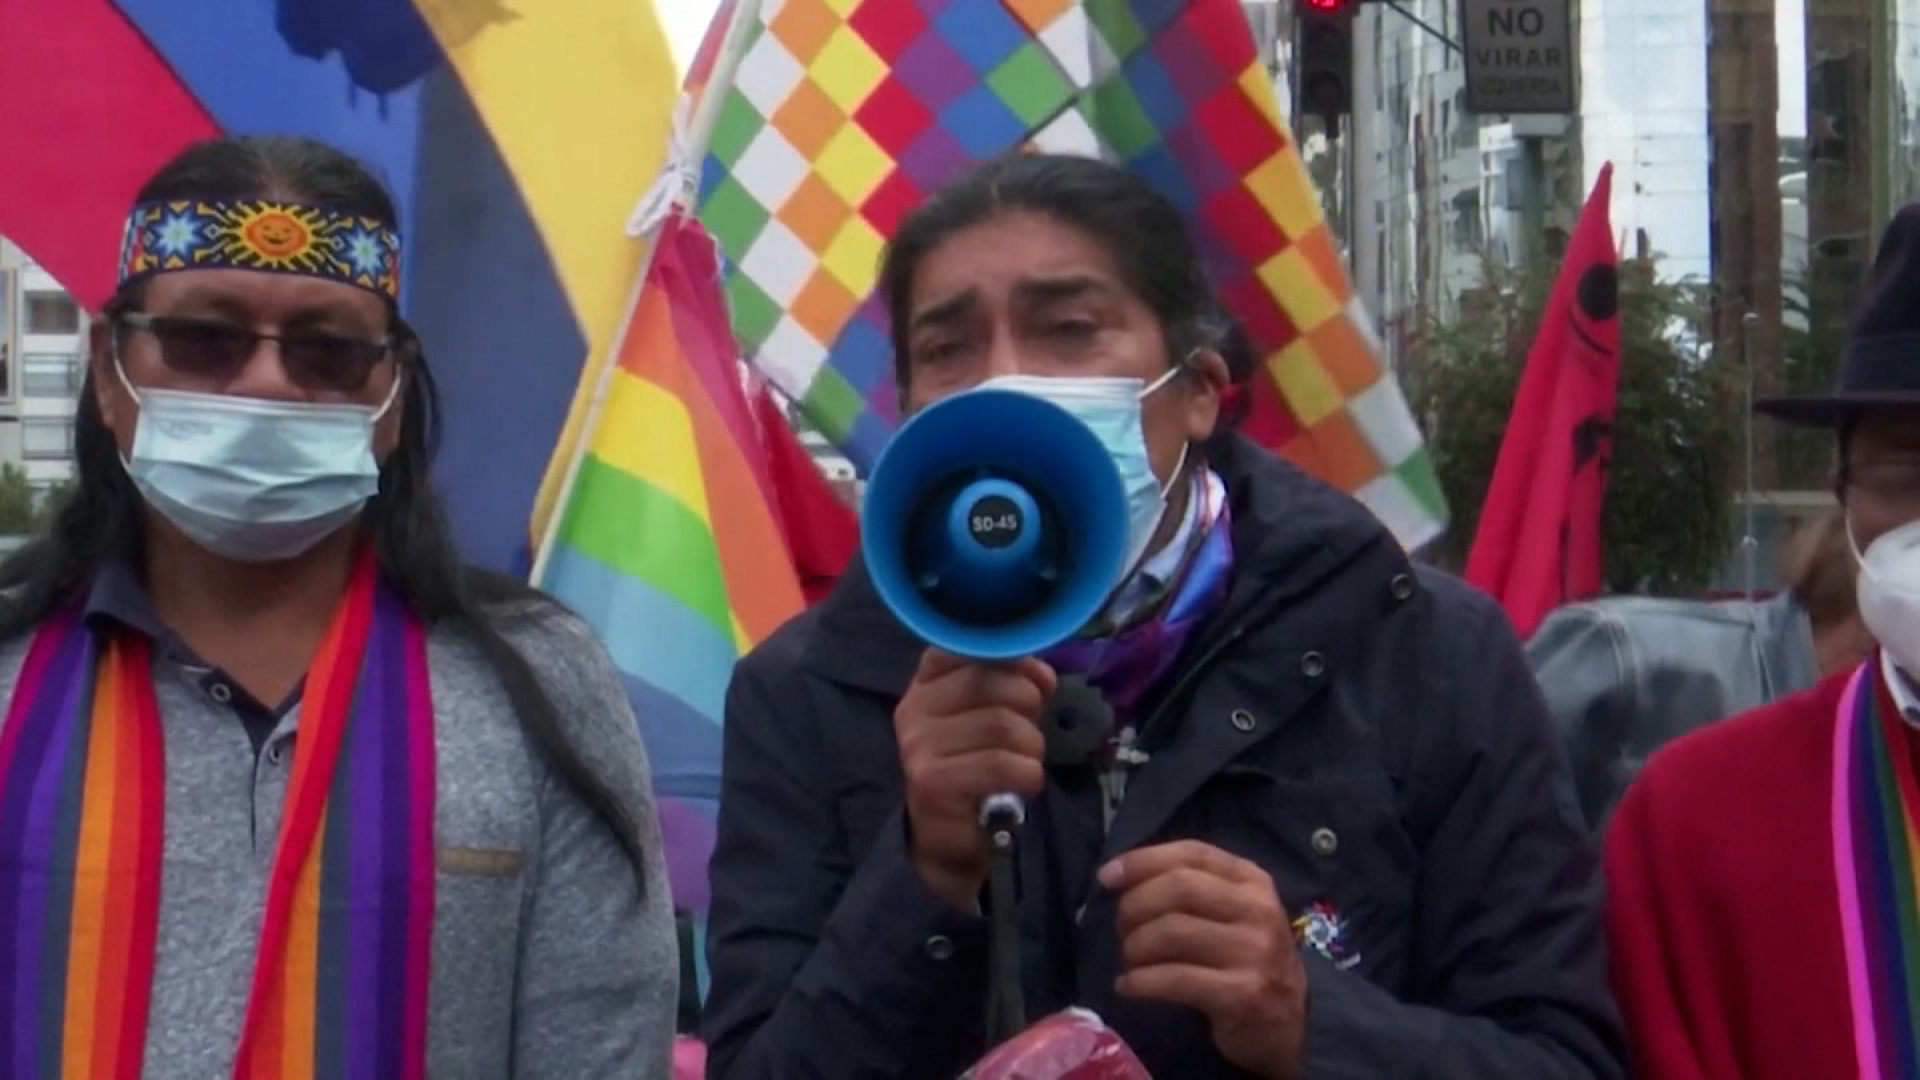 Indigenous people protest in Quito over electoral results